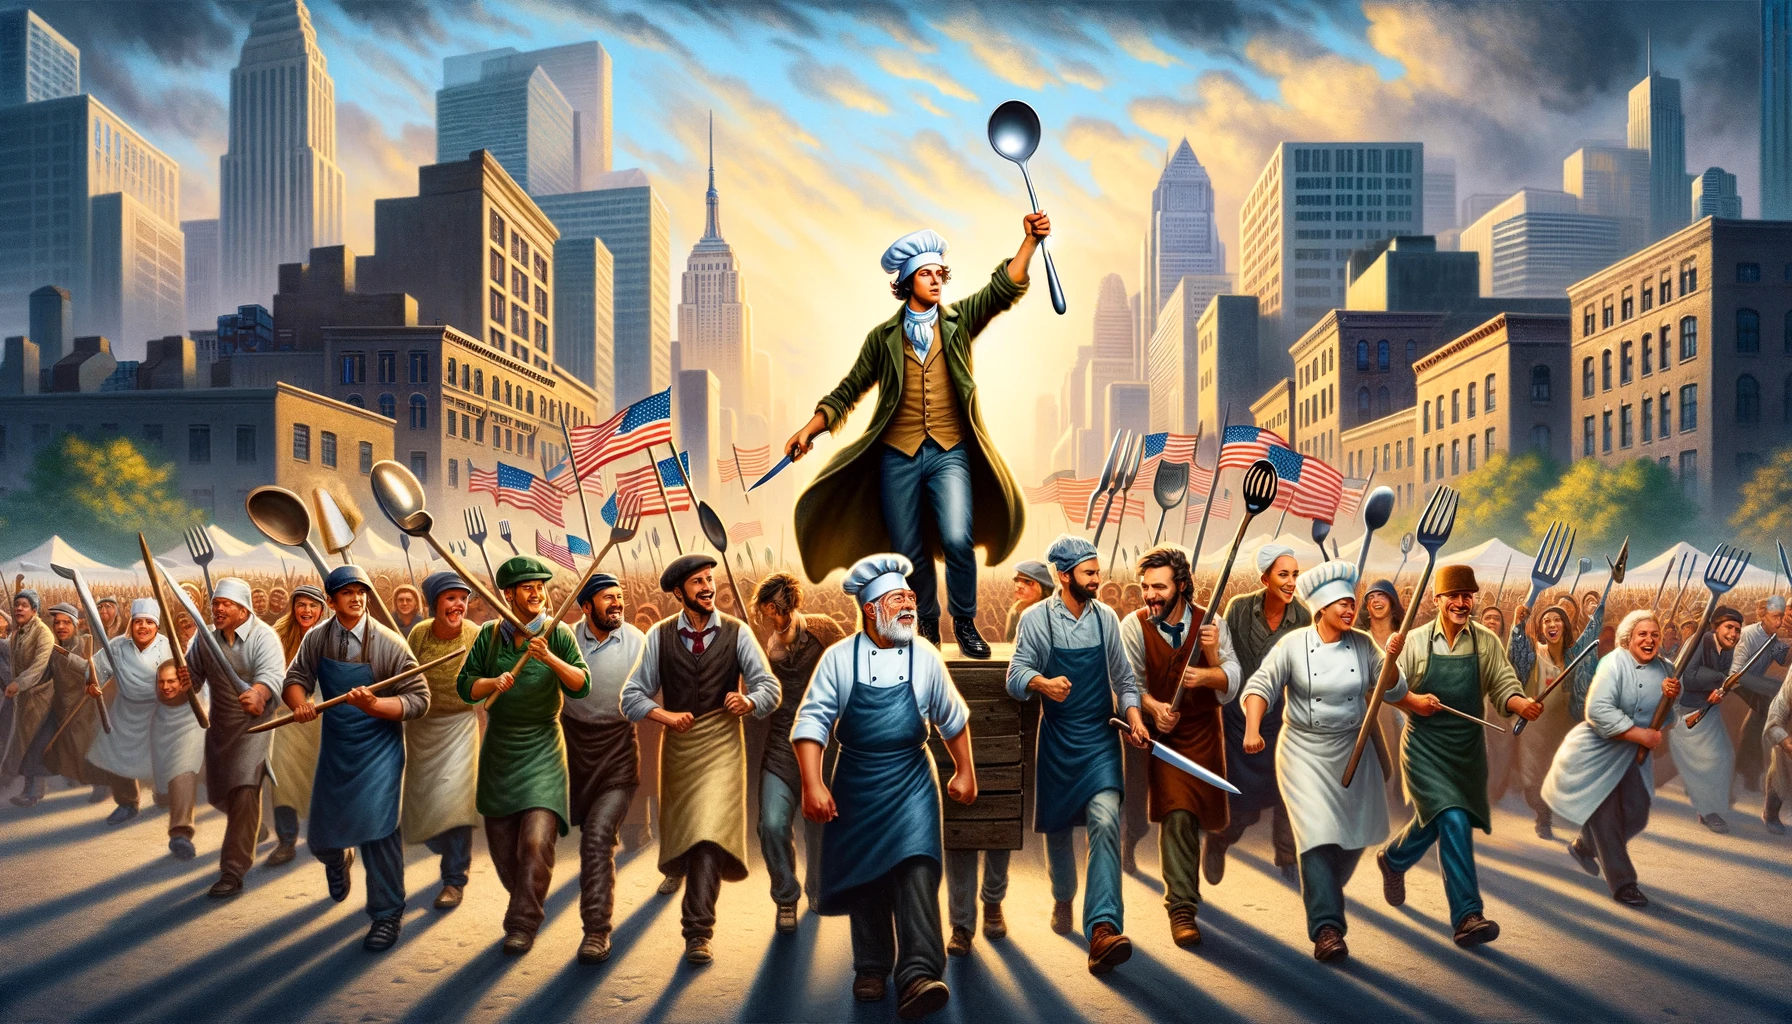 image inspired by "Liberty Leading the People," reimagined for the culinary revolution in the food tour industry, has been created. This visual captures the spirit of unity and the fight for authenticity in culinary experiences, portraying a dynamic group of chefs, artisans, and guides marching towards a future of genuine gastronomic adventures.